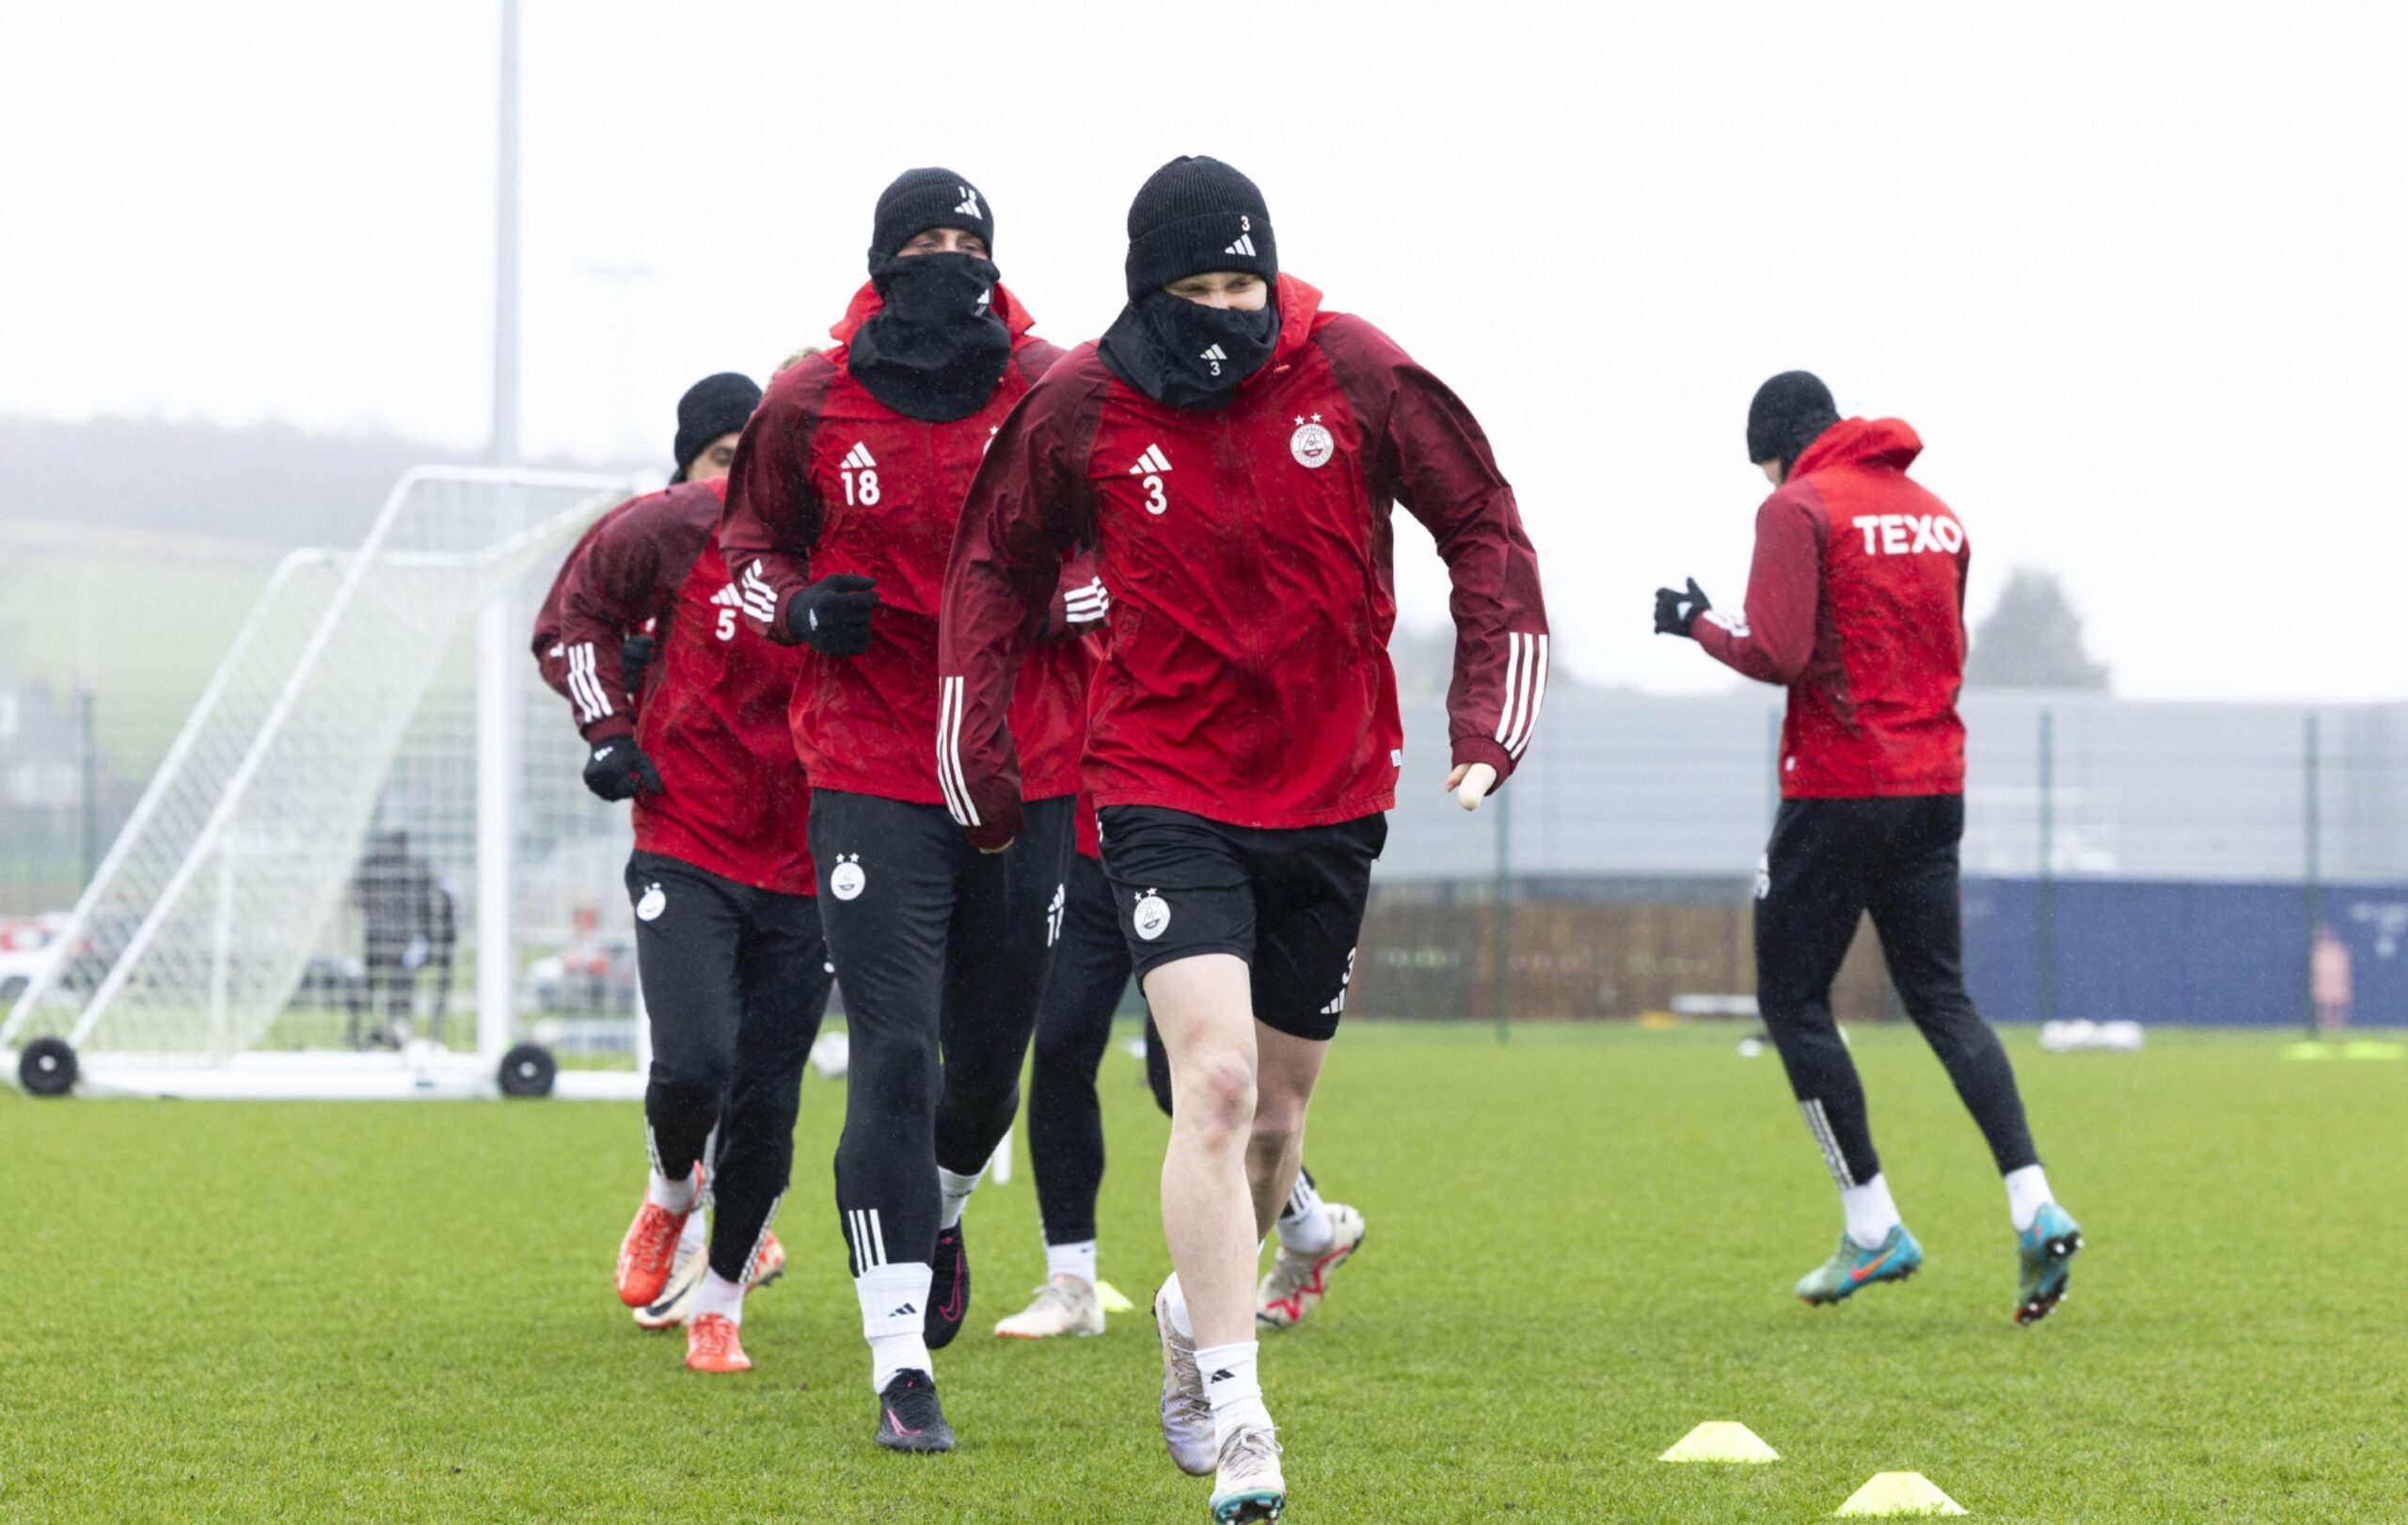 Aberdeen defender Jack MacKenzie during a training session at Cormack Park ahead of the match against Livingston. Image: SNS 